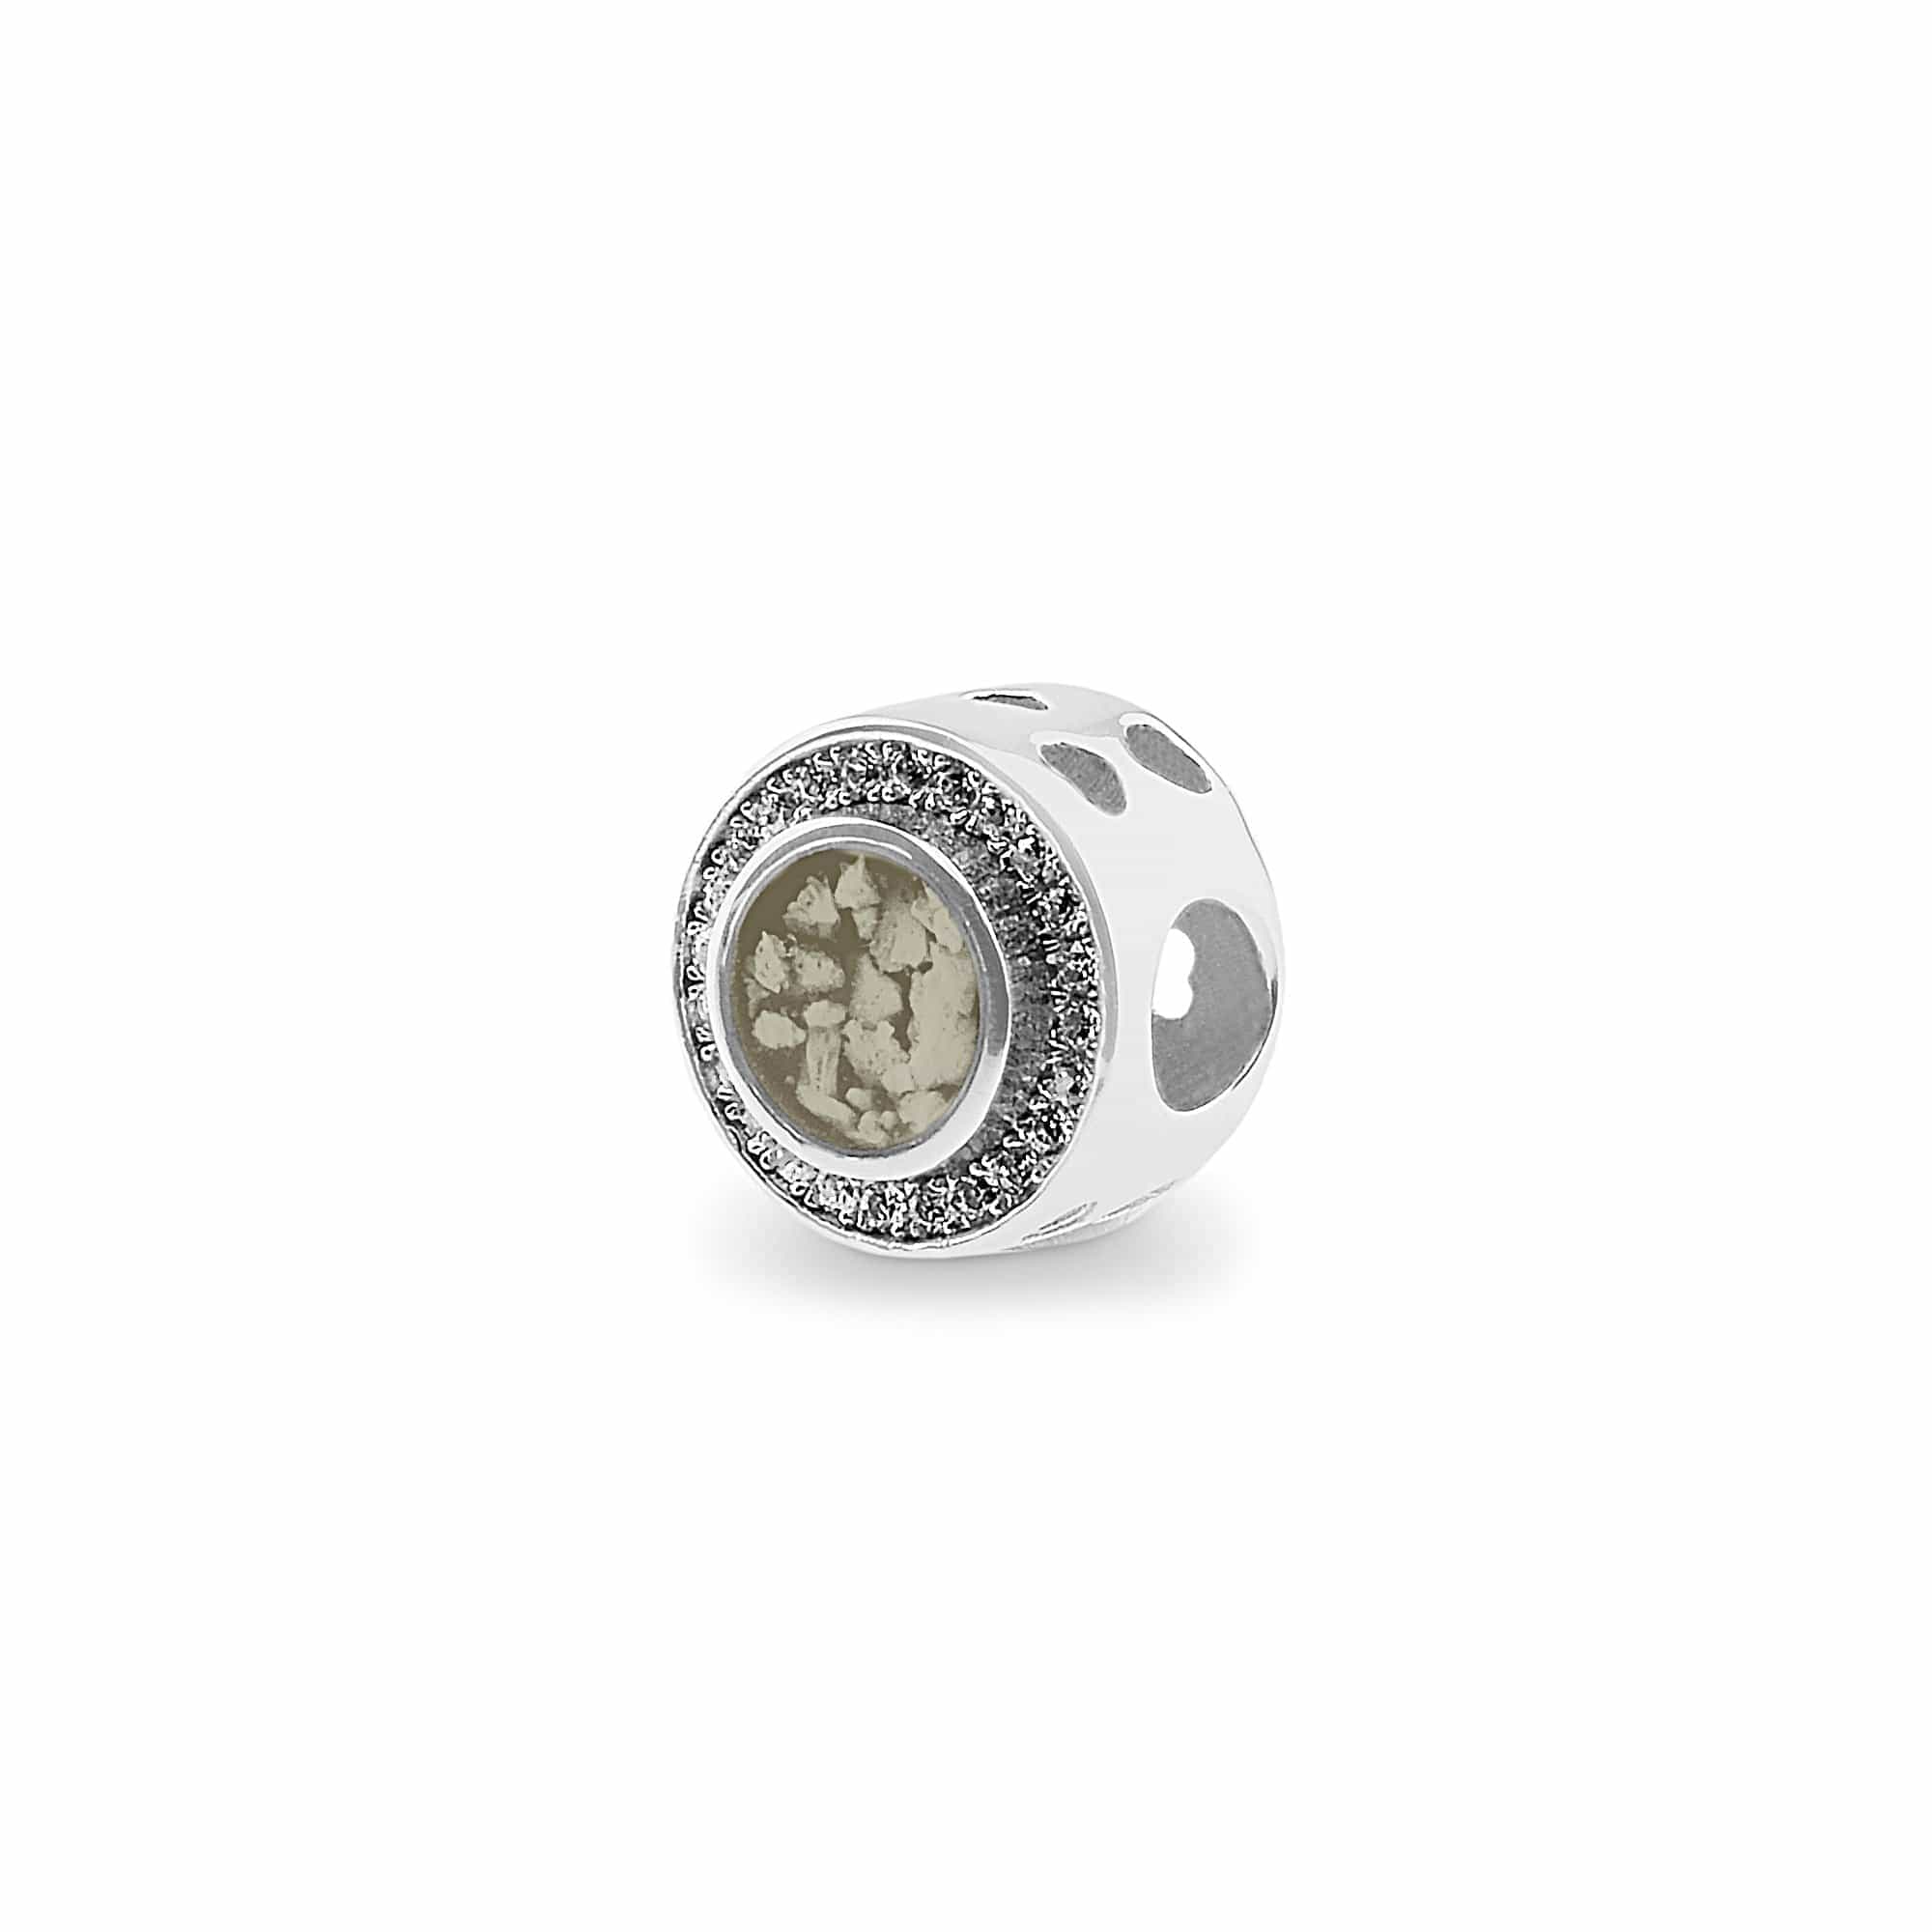 Admire Memorial Ashes Charm Bead with Fine Crystals